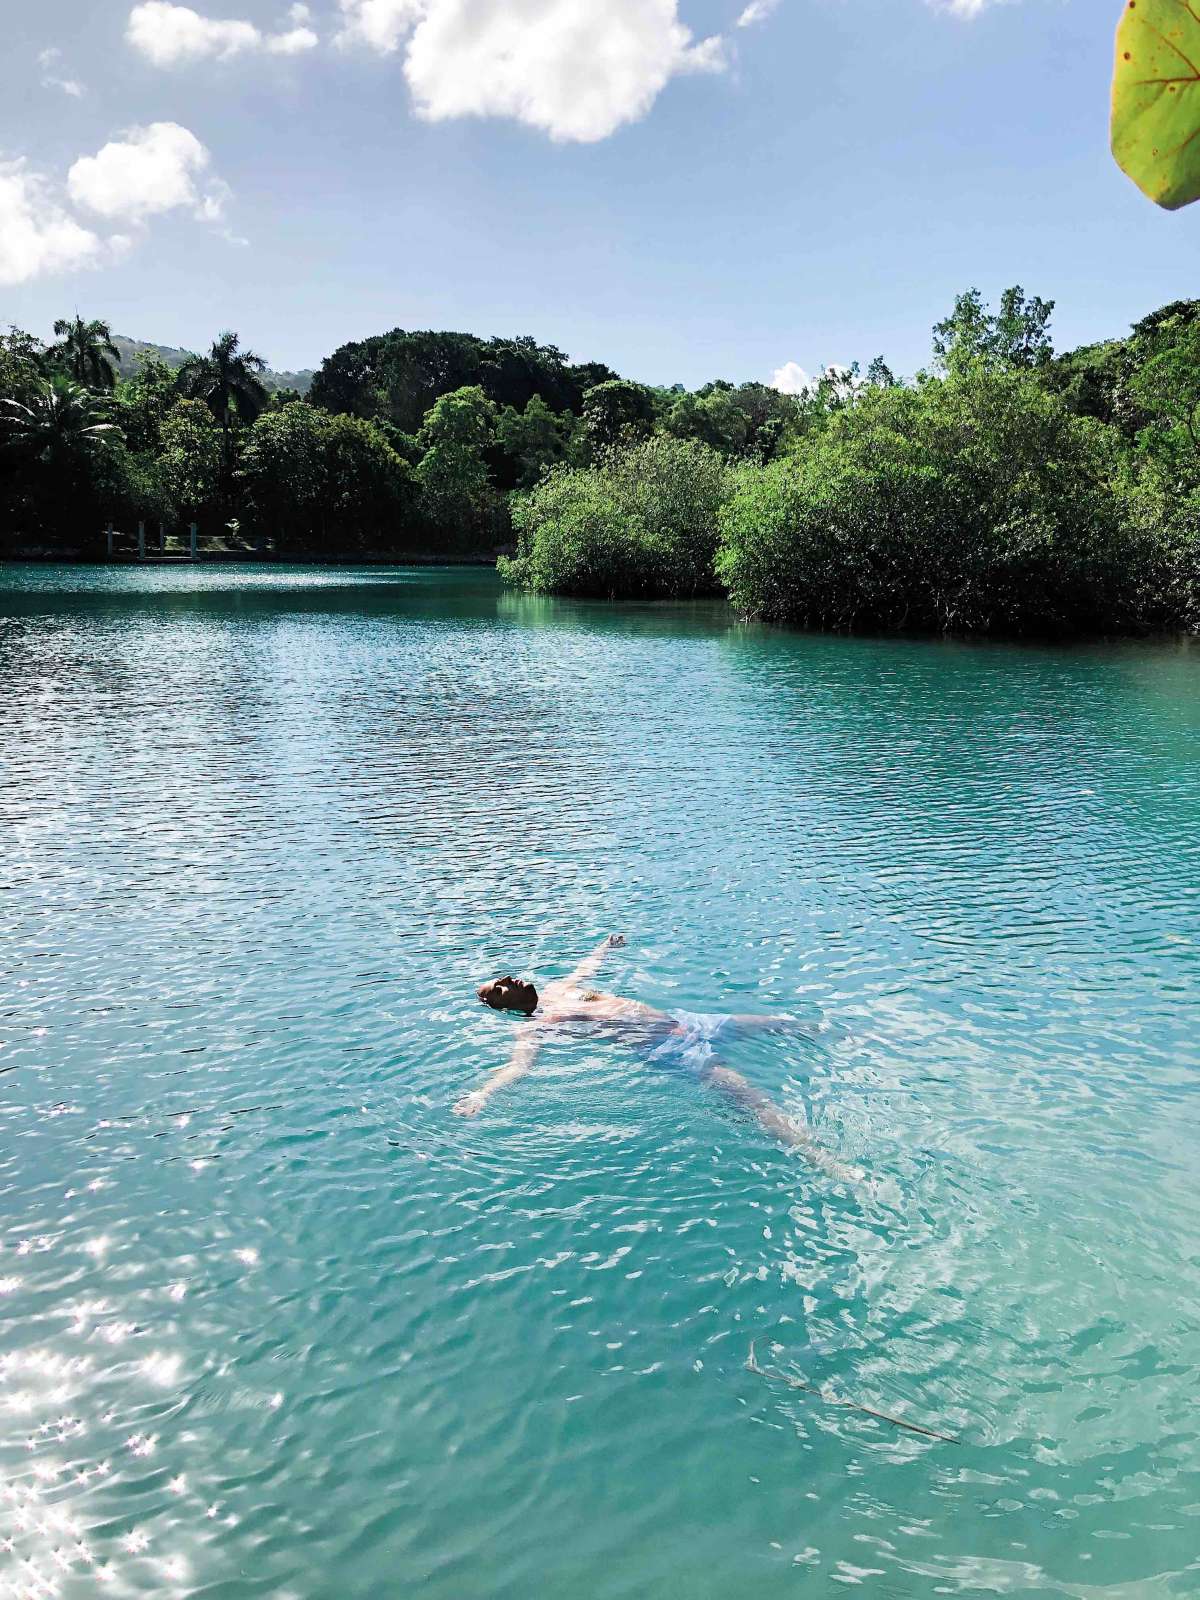 our lagoon cottage meant lingering days diving into the greenest waters